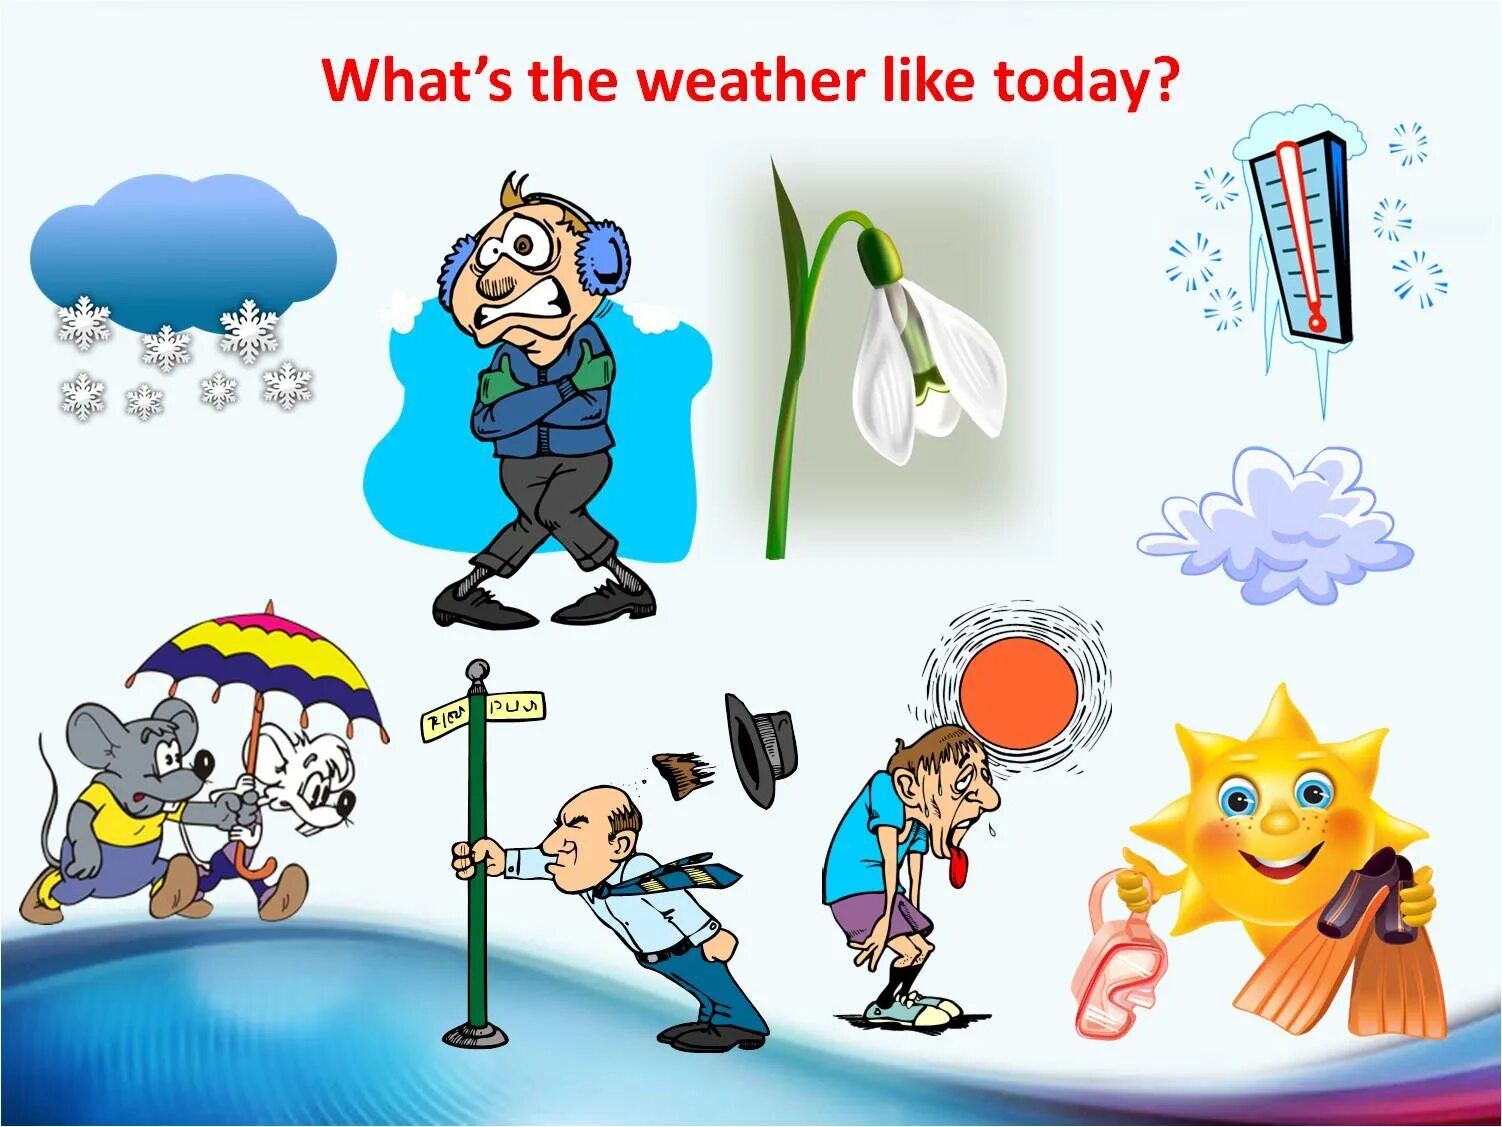 What the weather like today. What is the weather today. What`s the weather like today. Картинки для детей what is the weather today. 1 what is the weather like today